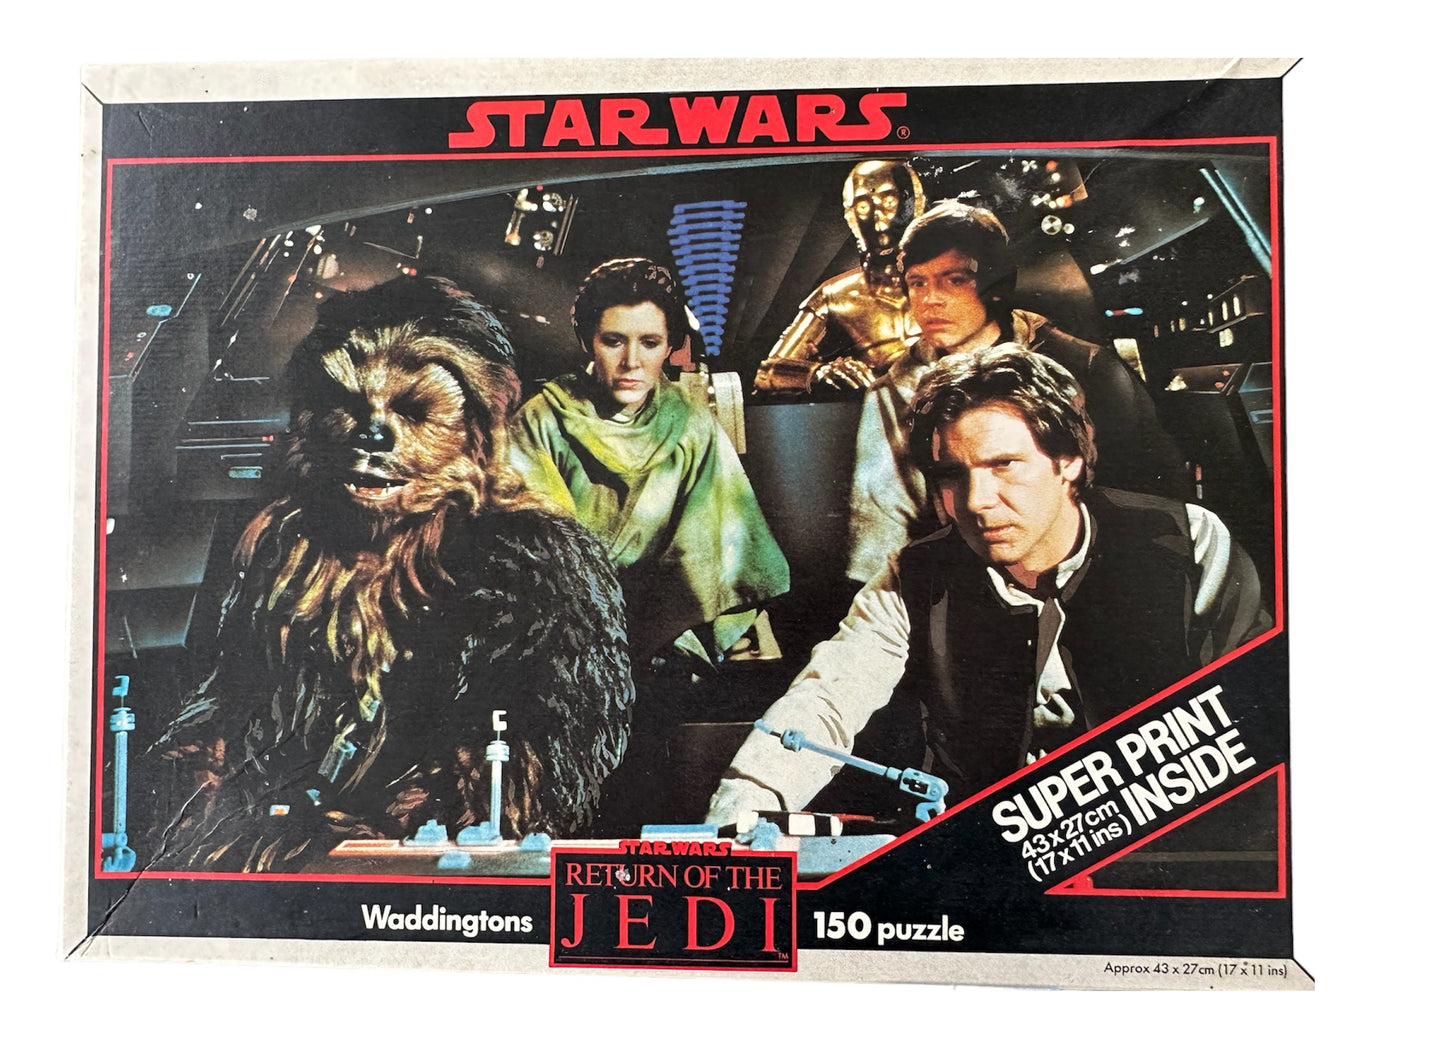 Vintage Waddington 1983 Star Wars Return Of The Jedi - Inside The Cockpit Of The Millennium Falcon - 150 Piece Fully Interlocking Jigsaw Puzzle from - Factory Sealed Shop Stock Room Find